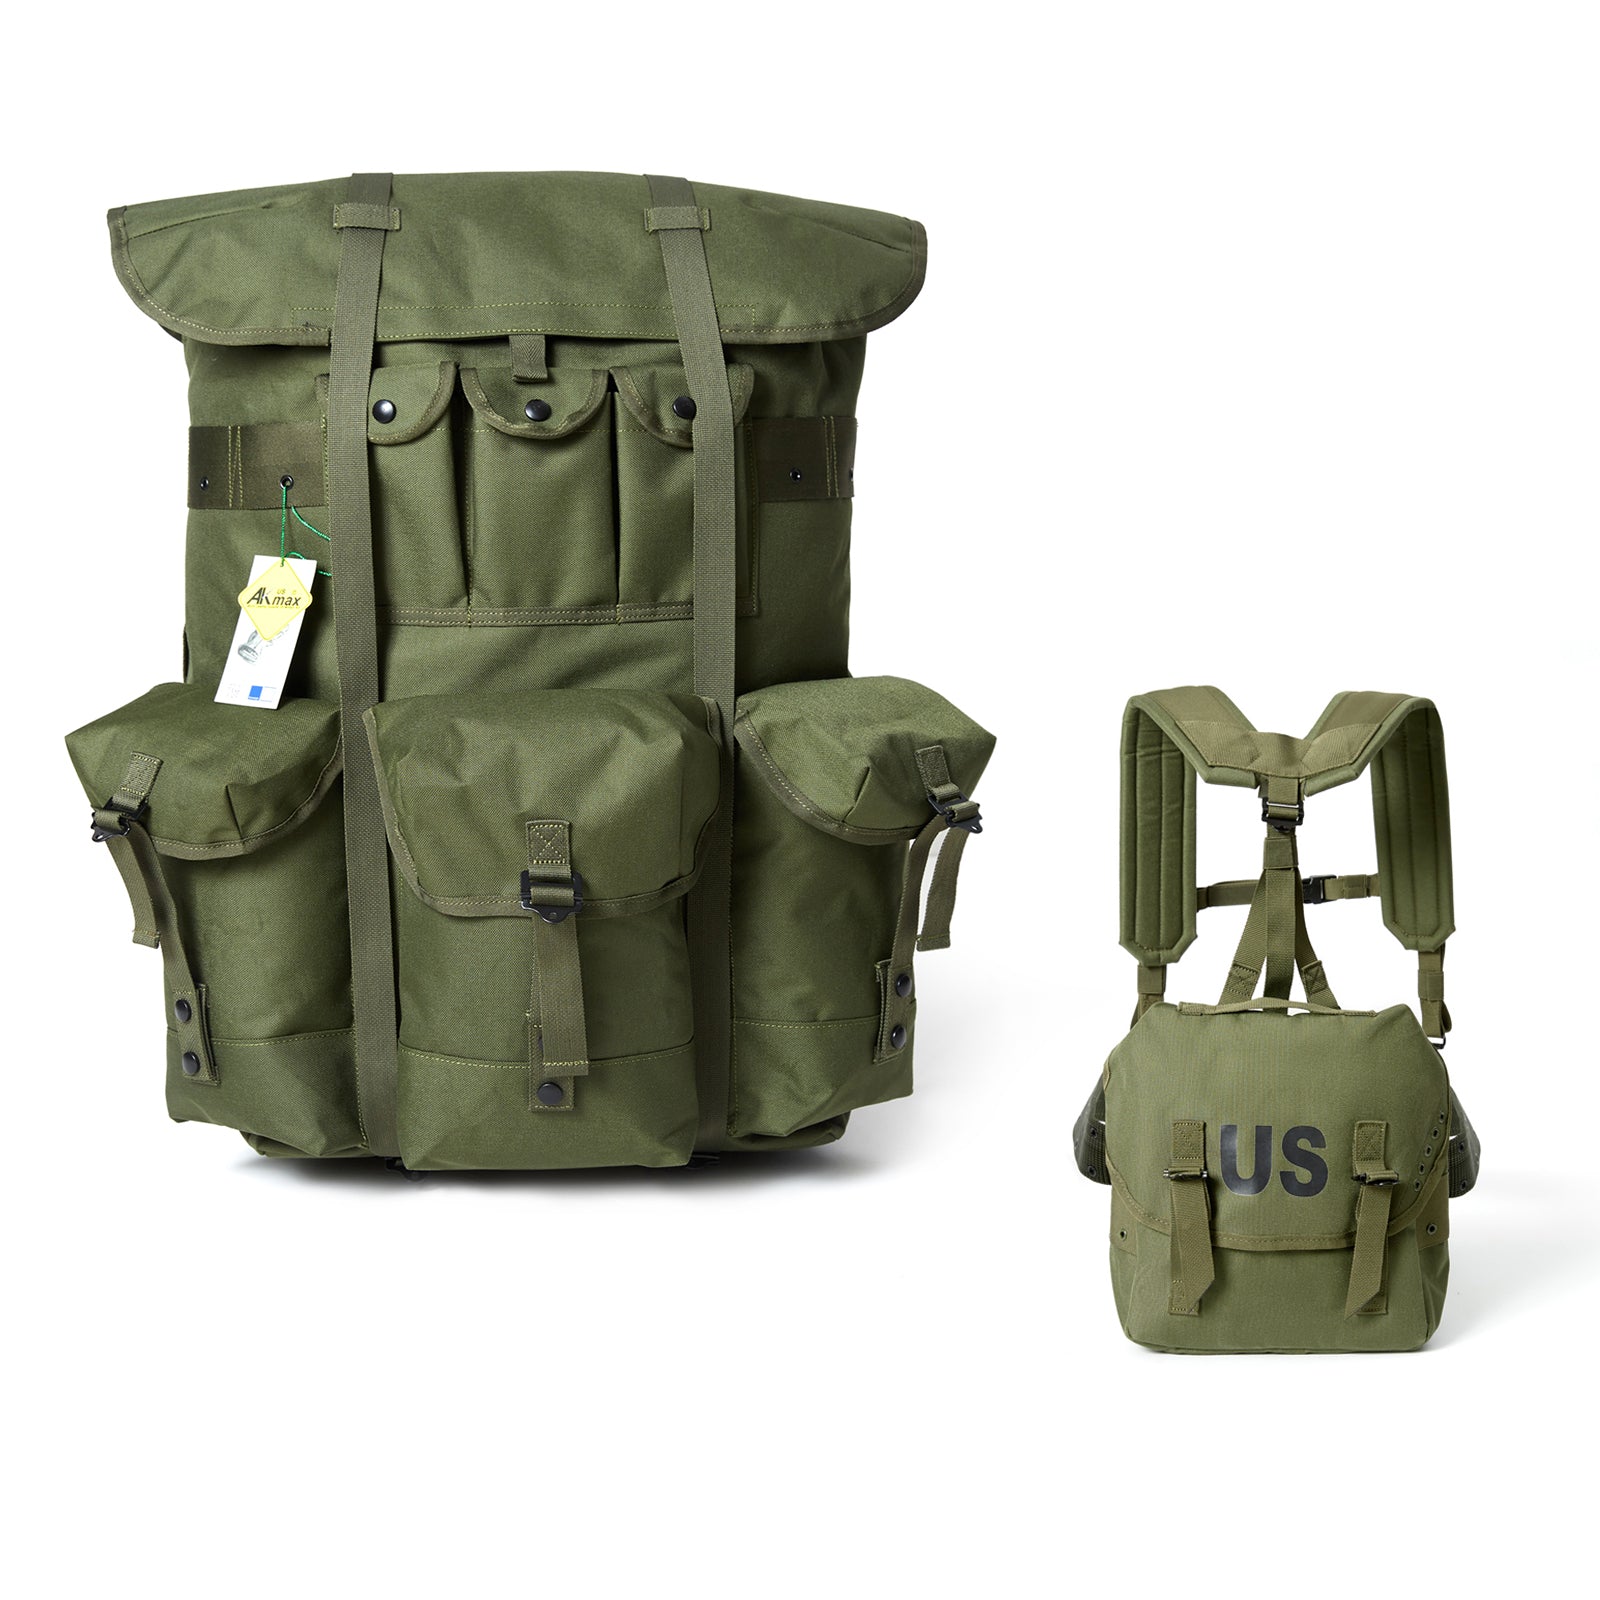 Akmax Rucksack Alice Large Pack Backpack and Butt Pack - AKmax